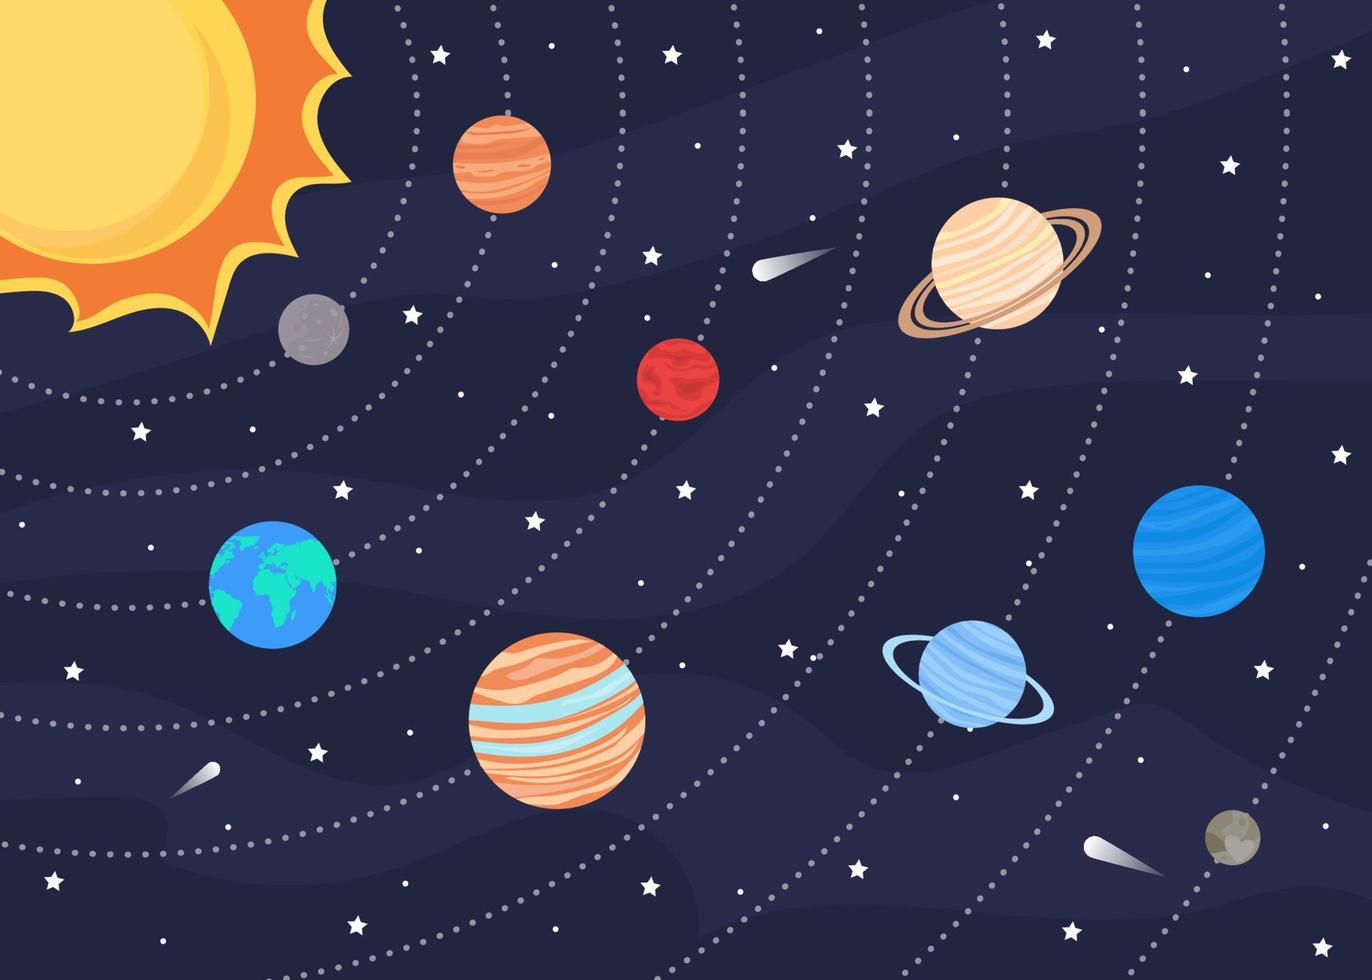 Planets of the solar system, against the background of the starry sky. vector